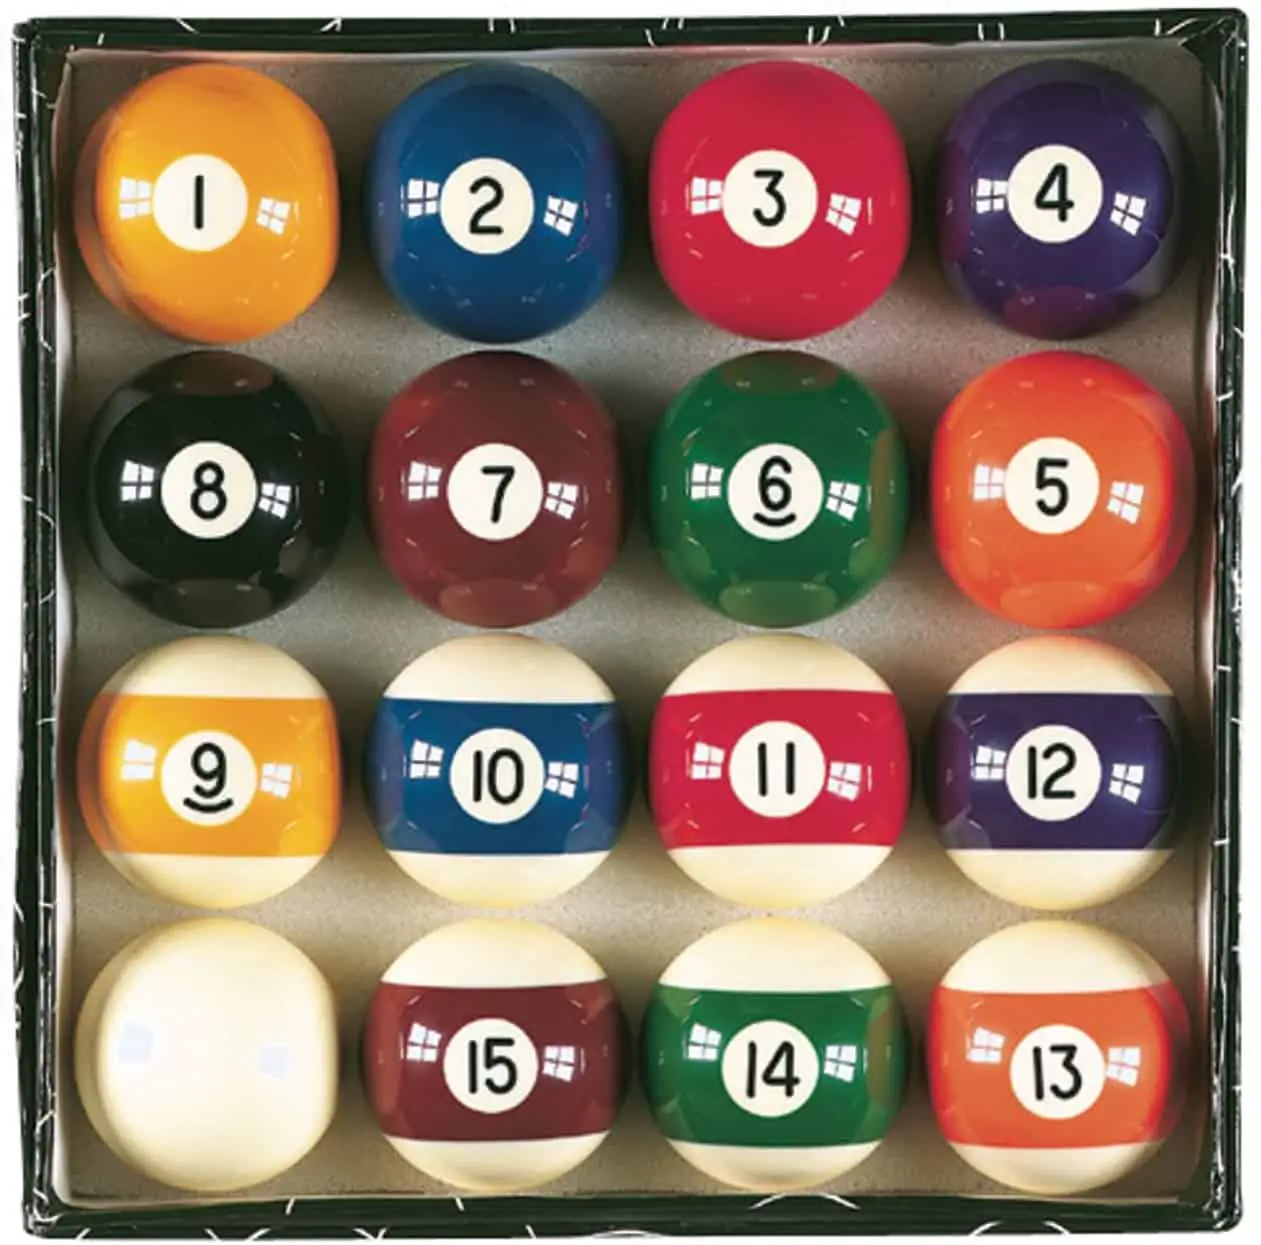 Resin Billiard Ball Materials Exquisite and Beautiful Easy to Carry for Amateur for Outdoor Enthusiasts BTIHCEUOT Billiard Training Ball 